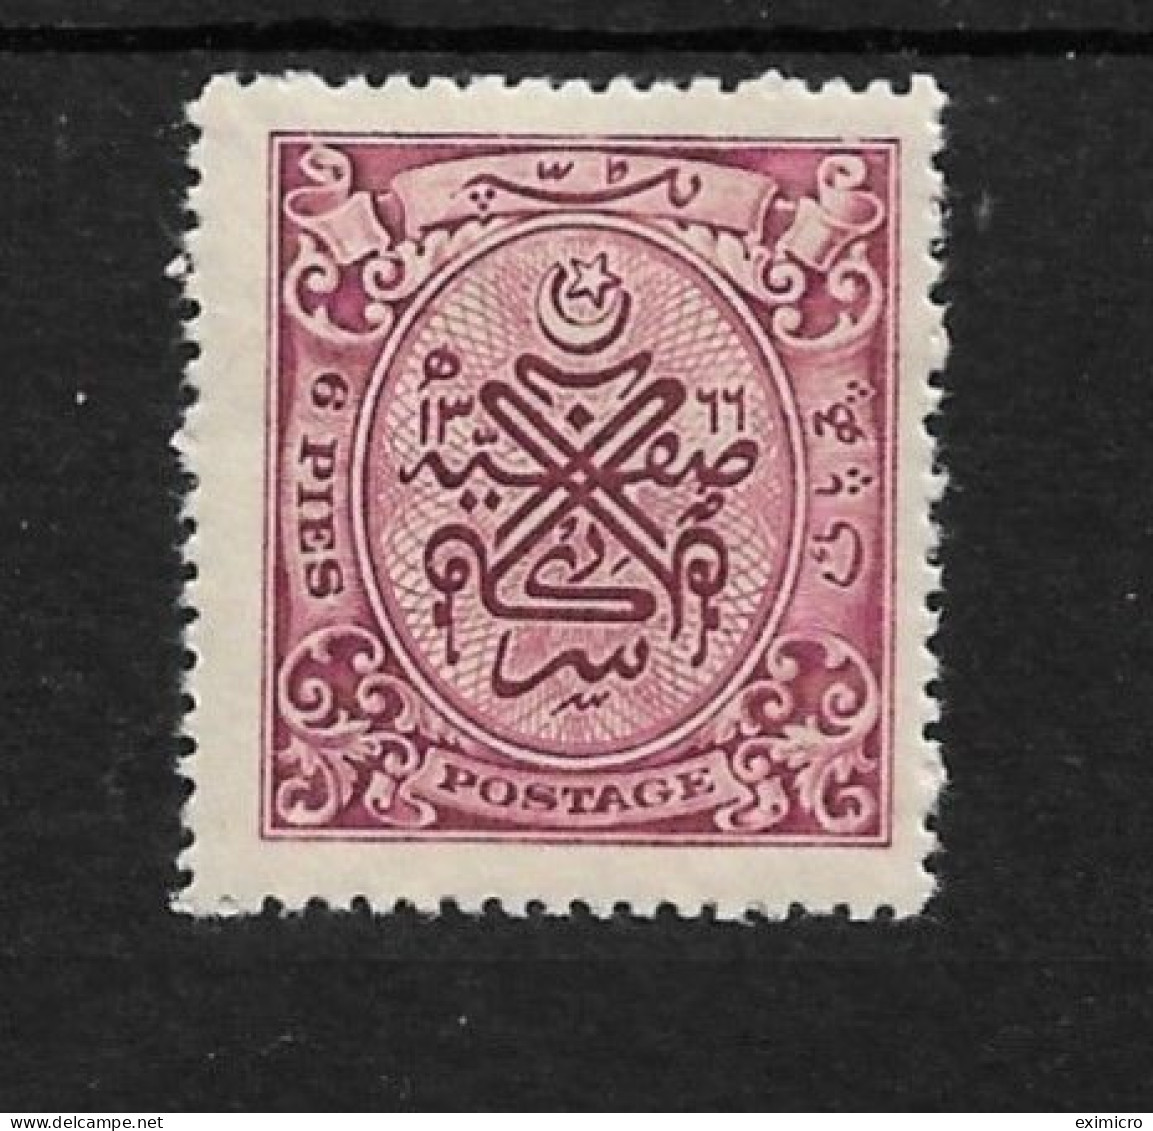 INDIA - HYDERABAD 1948 6p SG 59 LIGHTLY MOUNTED MINT Cat £15 - Hyderabad